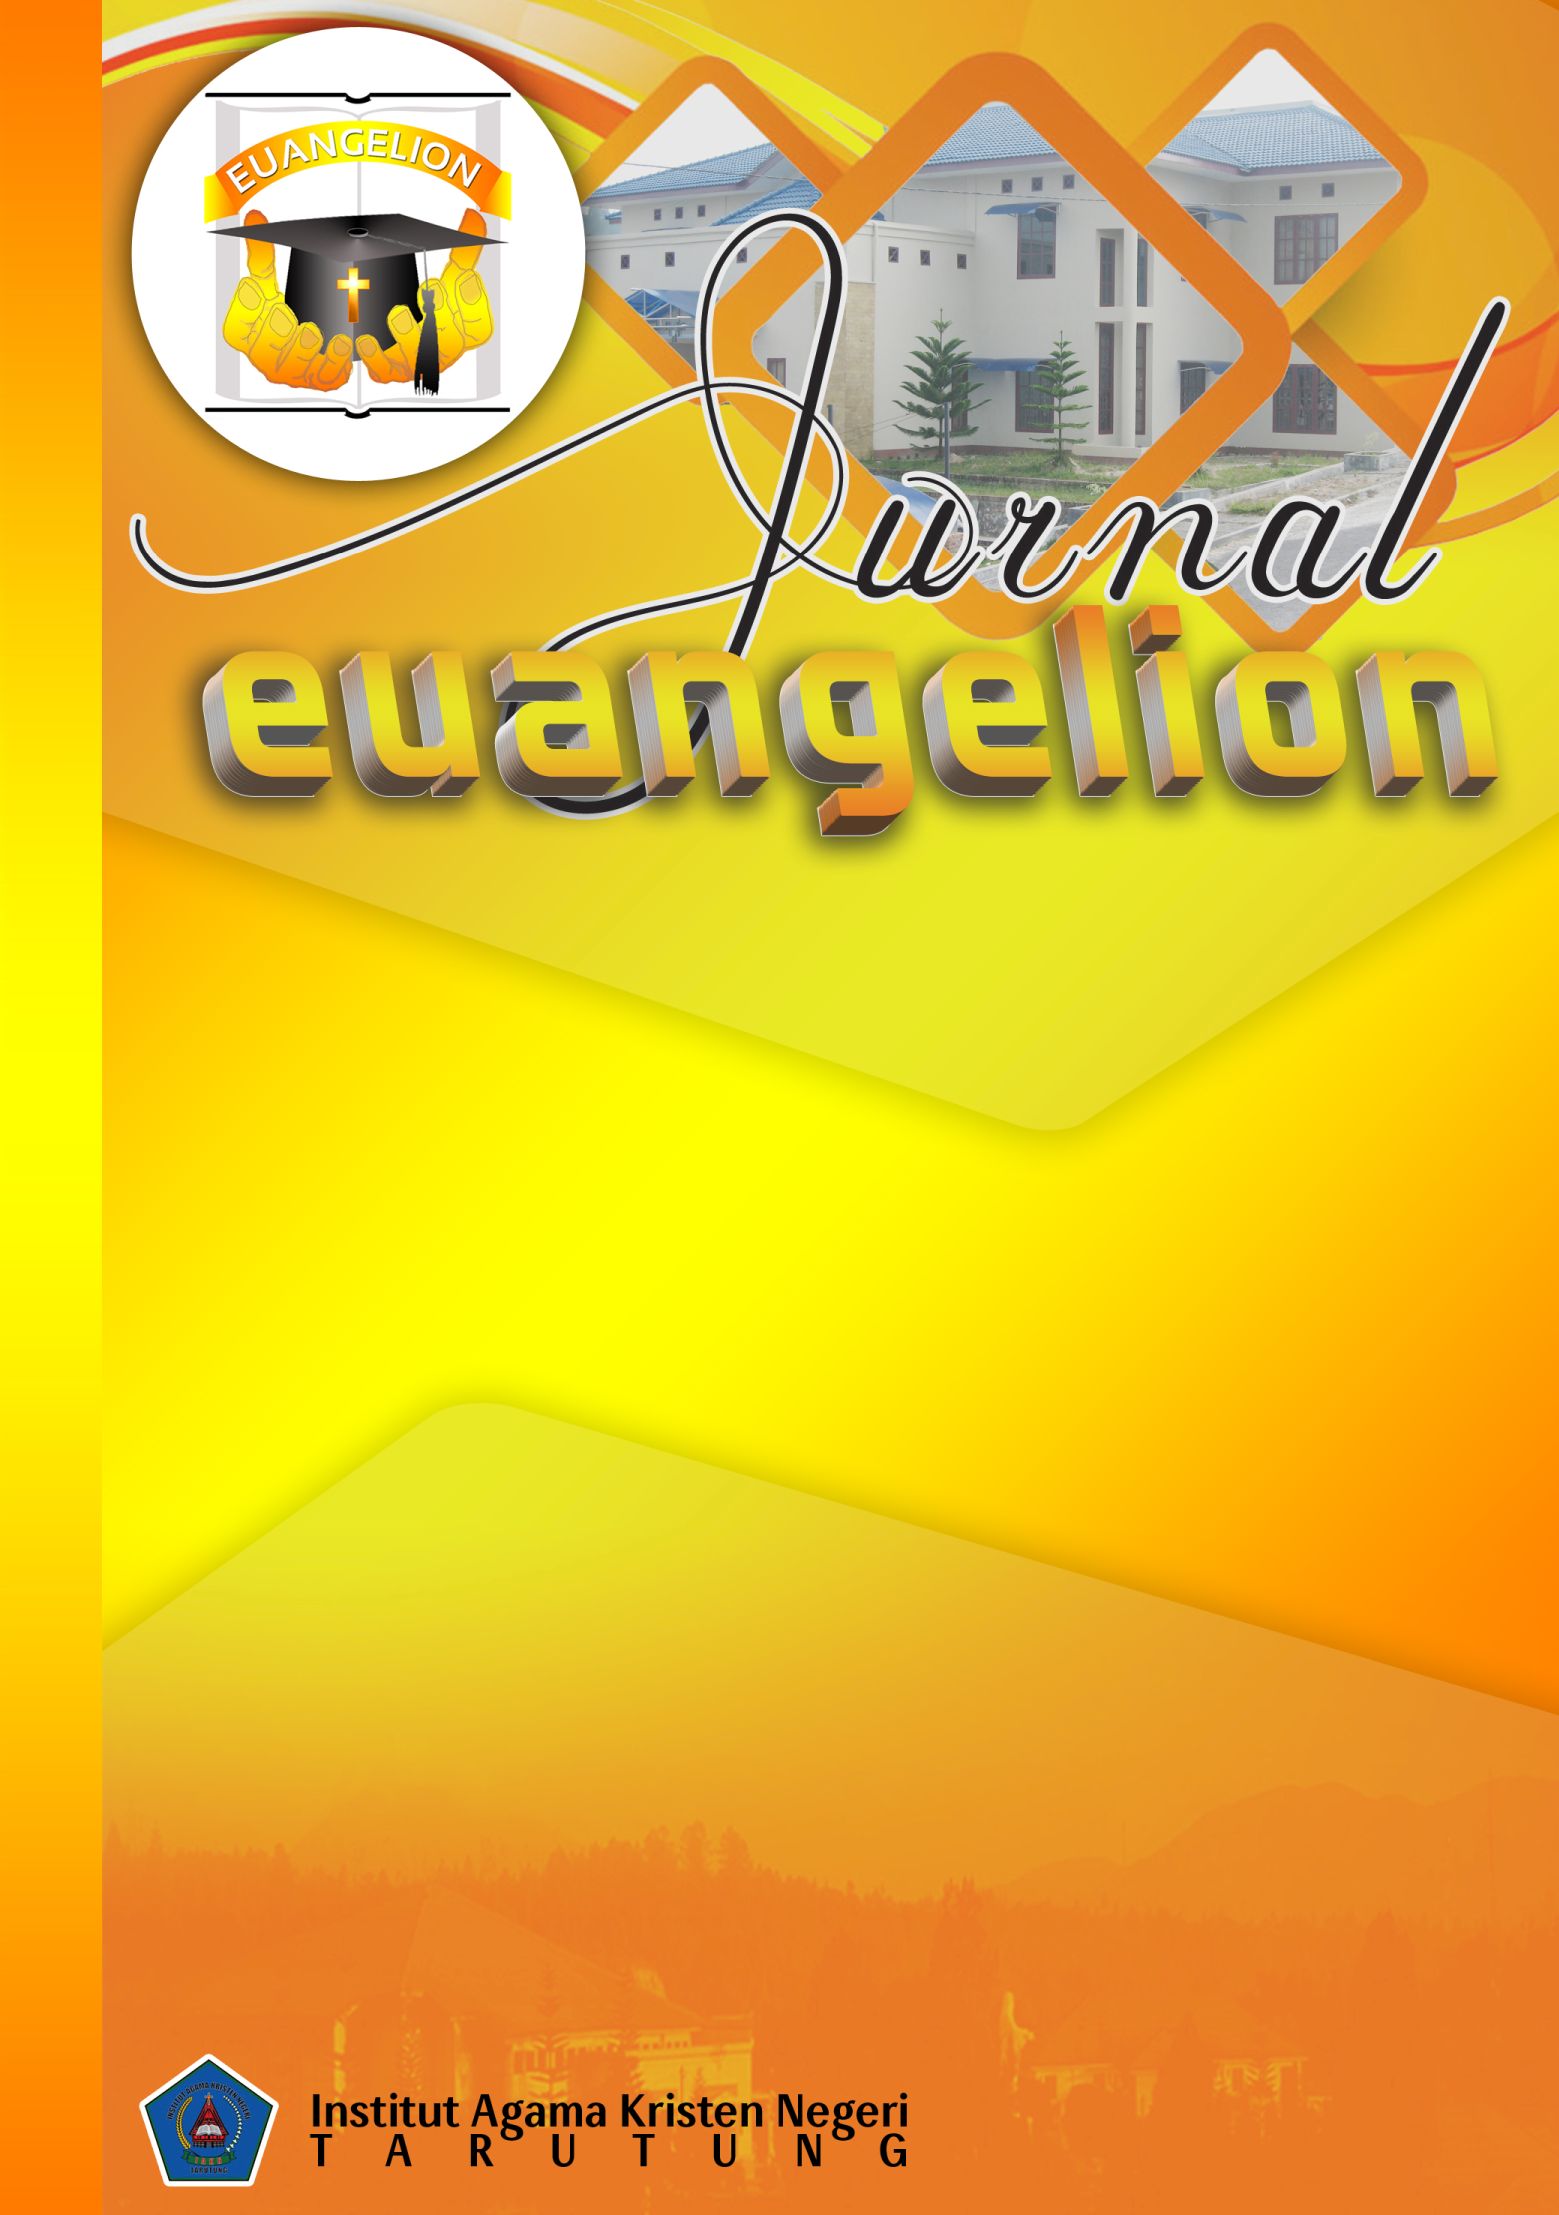 JURNAL EUANGELION: Jurnal Euangelion, an electronic journal, provides a forum for publishing the original research articles related to theology studies and education in Christian area and published under LPPM of the Institut Agama Kristen Negeri Tarutung. Journal regularly published twice in one year, in April and October.  This journal encompasses scientific work and original research articles, including: • Theology in Practices • Old and New Testament Studies • Missiology and Contextualization • Religious Studies • Christian Education